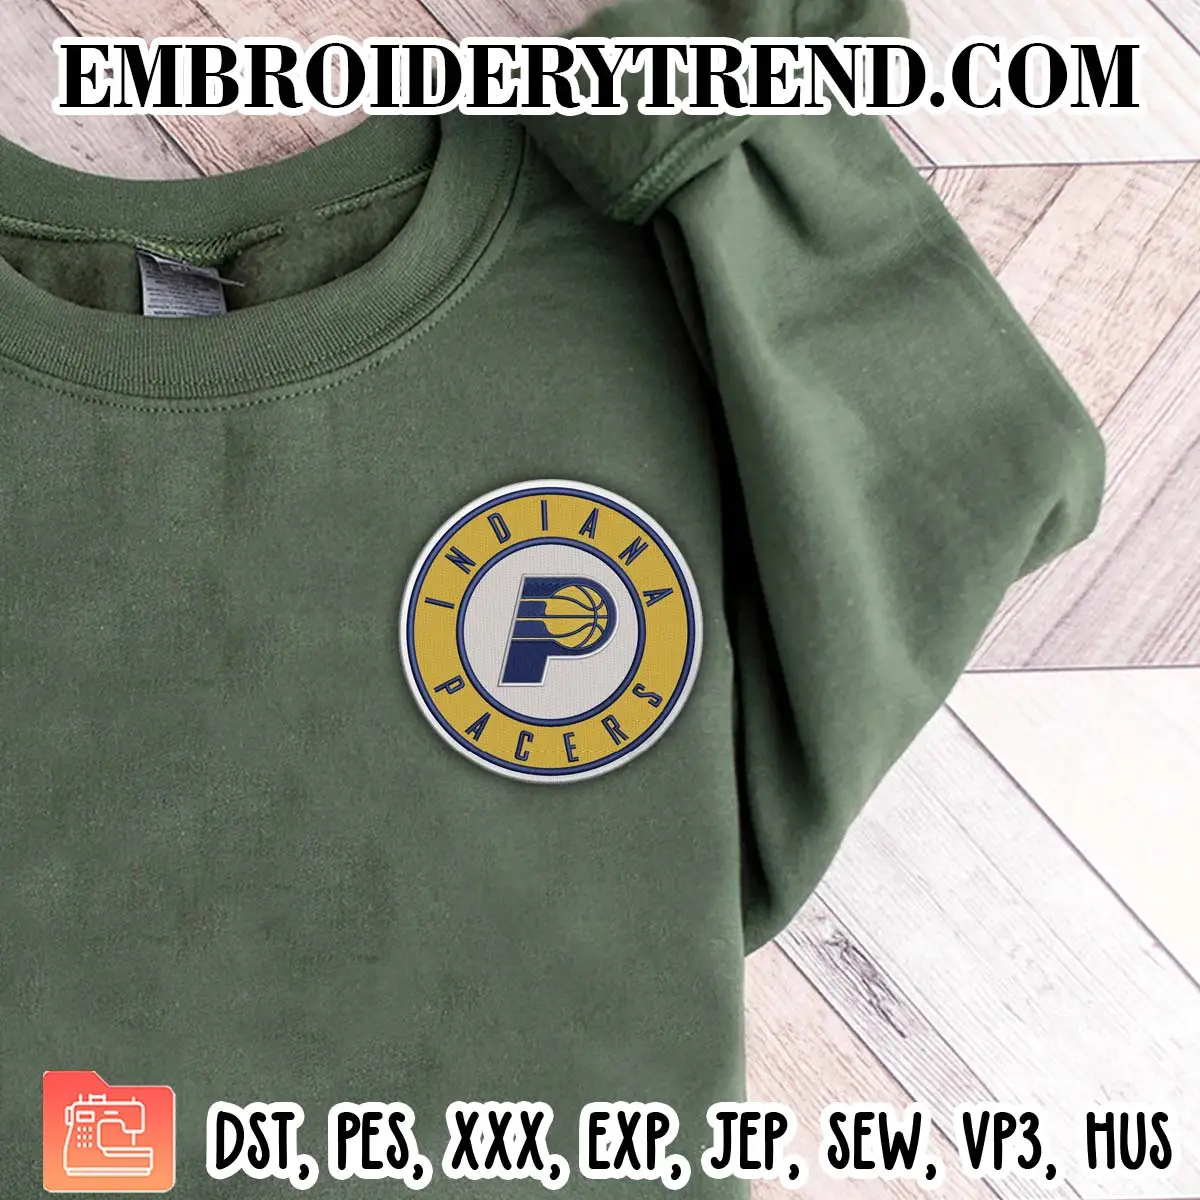 Indiana Pacers Logo Embroidery Design, NBA Team Machine Embroidery Digitized Pes Files